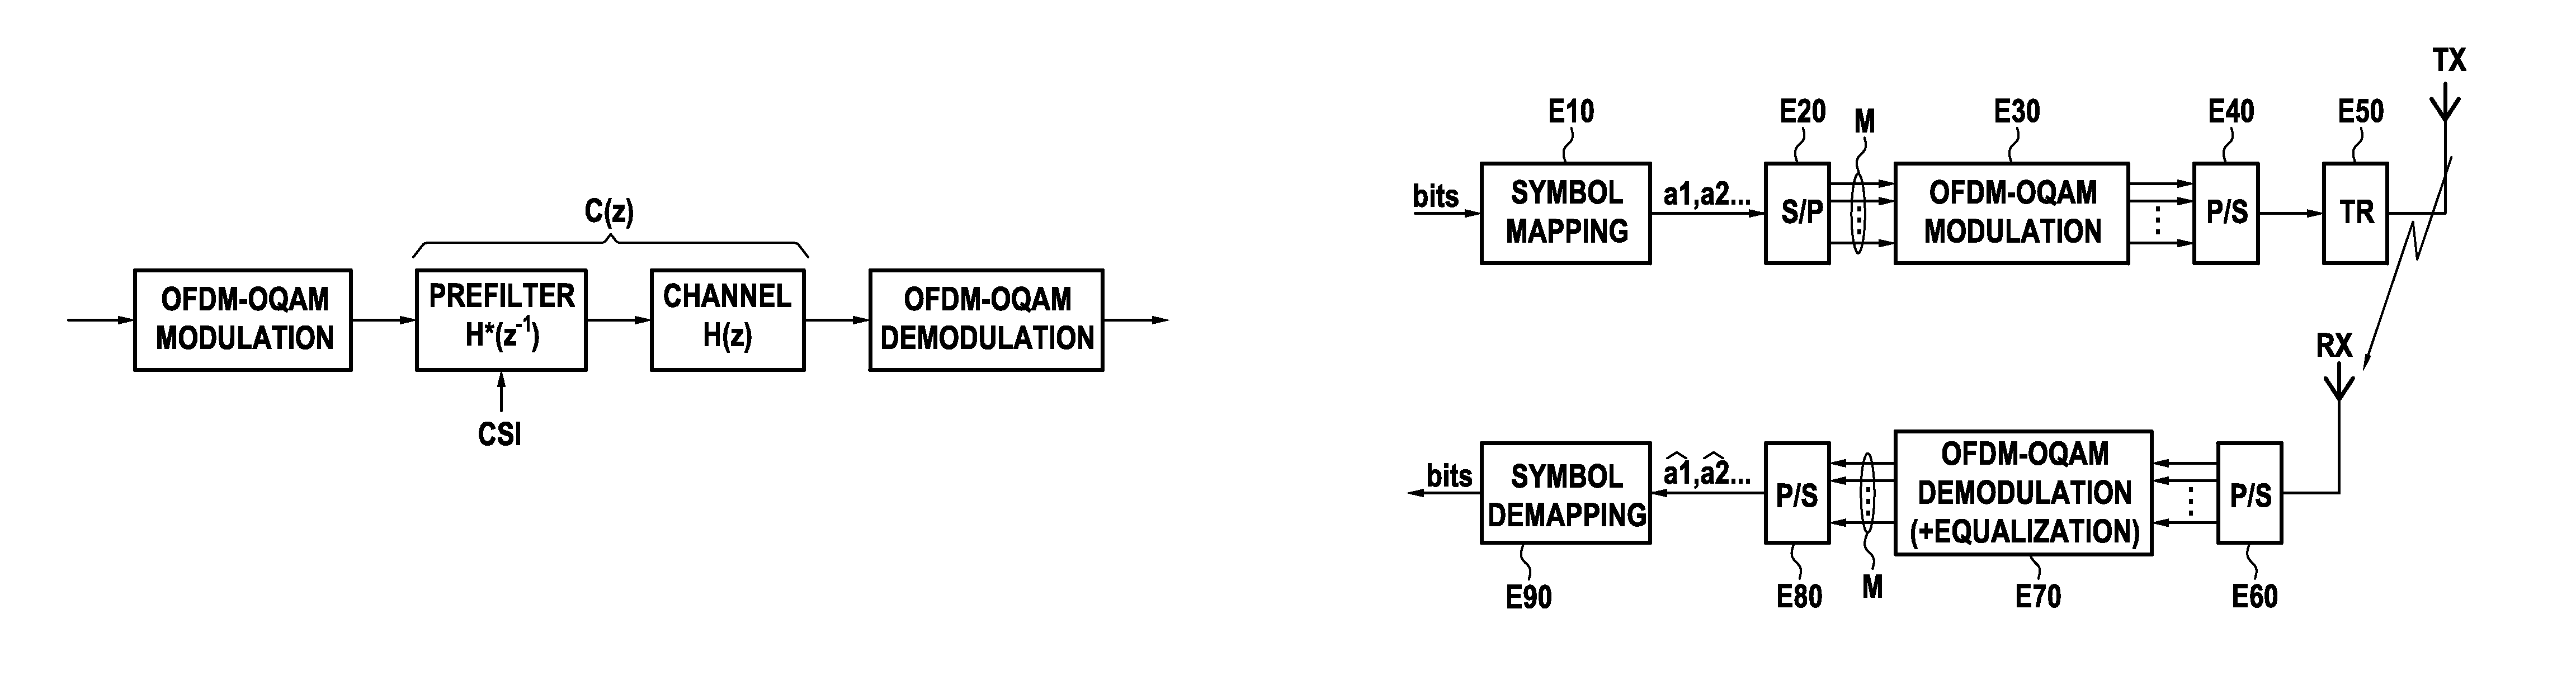 Method for transmitting at least one multi-carrier signal consisting of OFDM-OQAM symbols